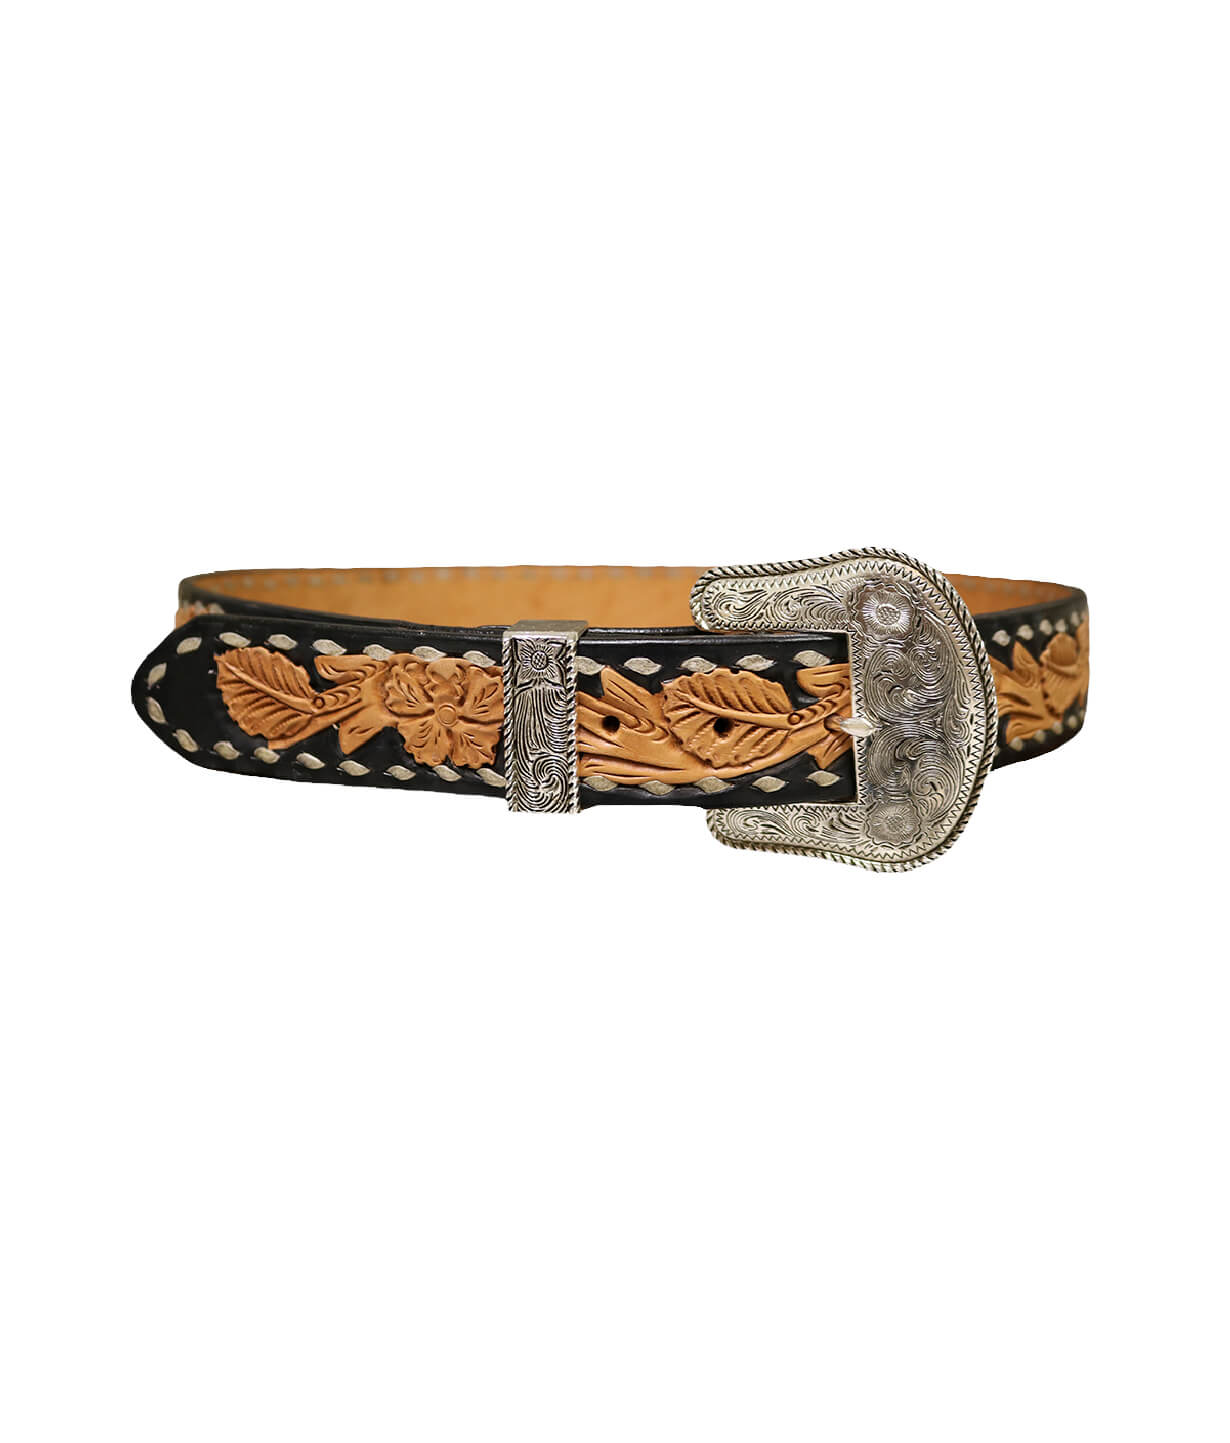 This is our STRAIGHT golden leather belt with fully black painted background and wild rose tooling. It has single buckstitching around the border. It comes with a silver belt buckle and silver belt loop.  